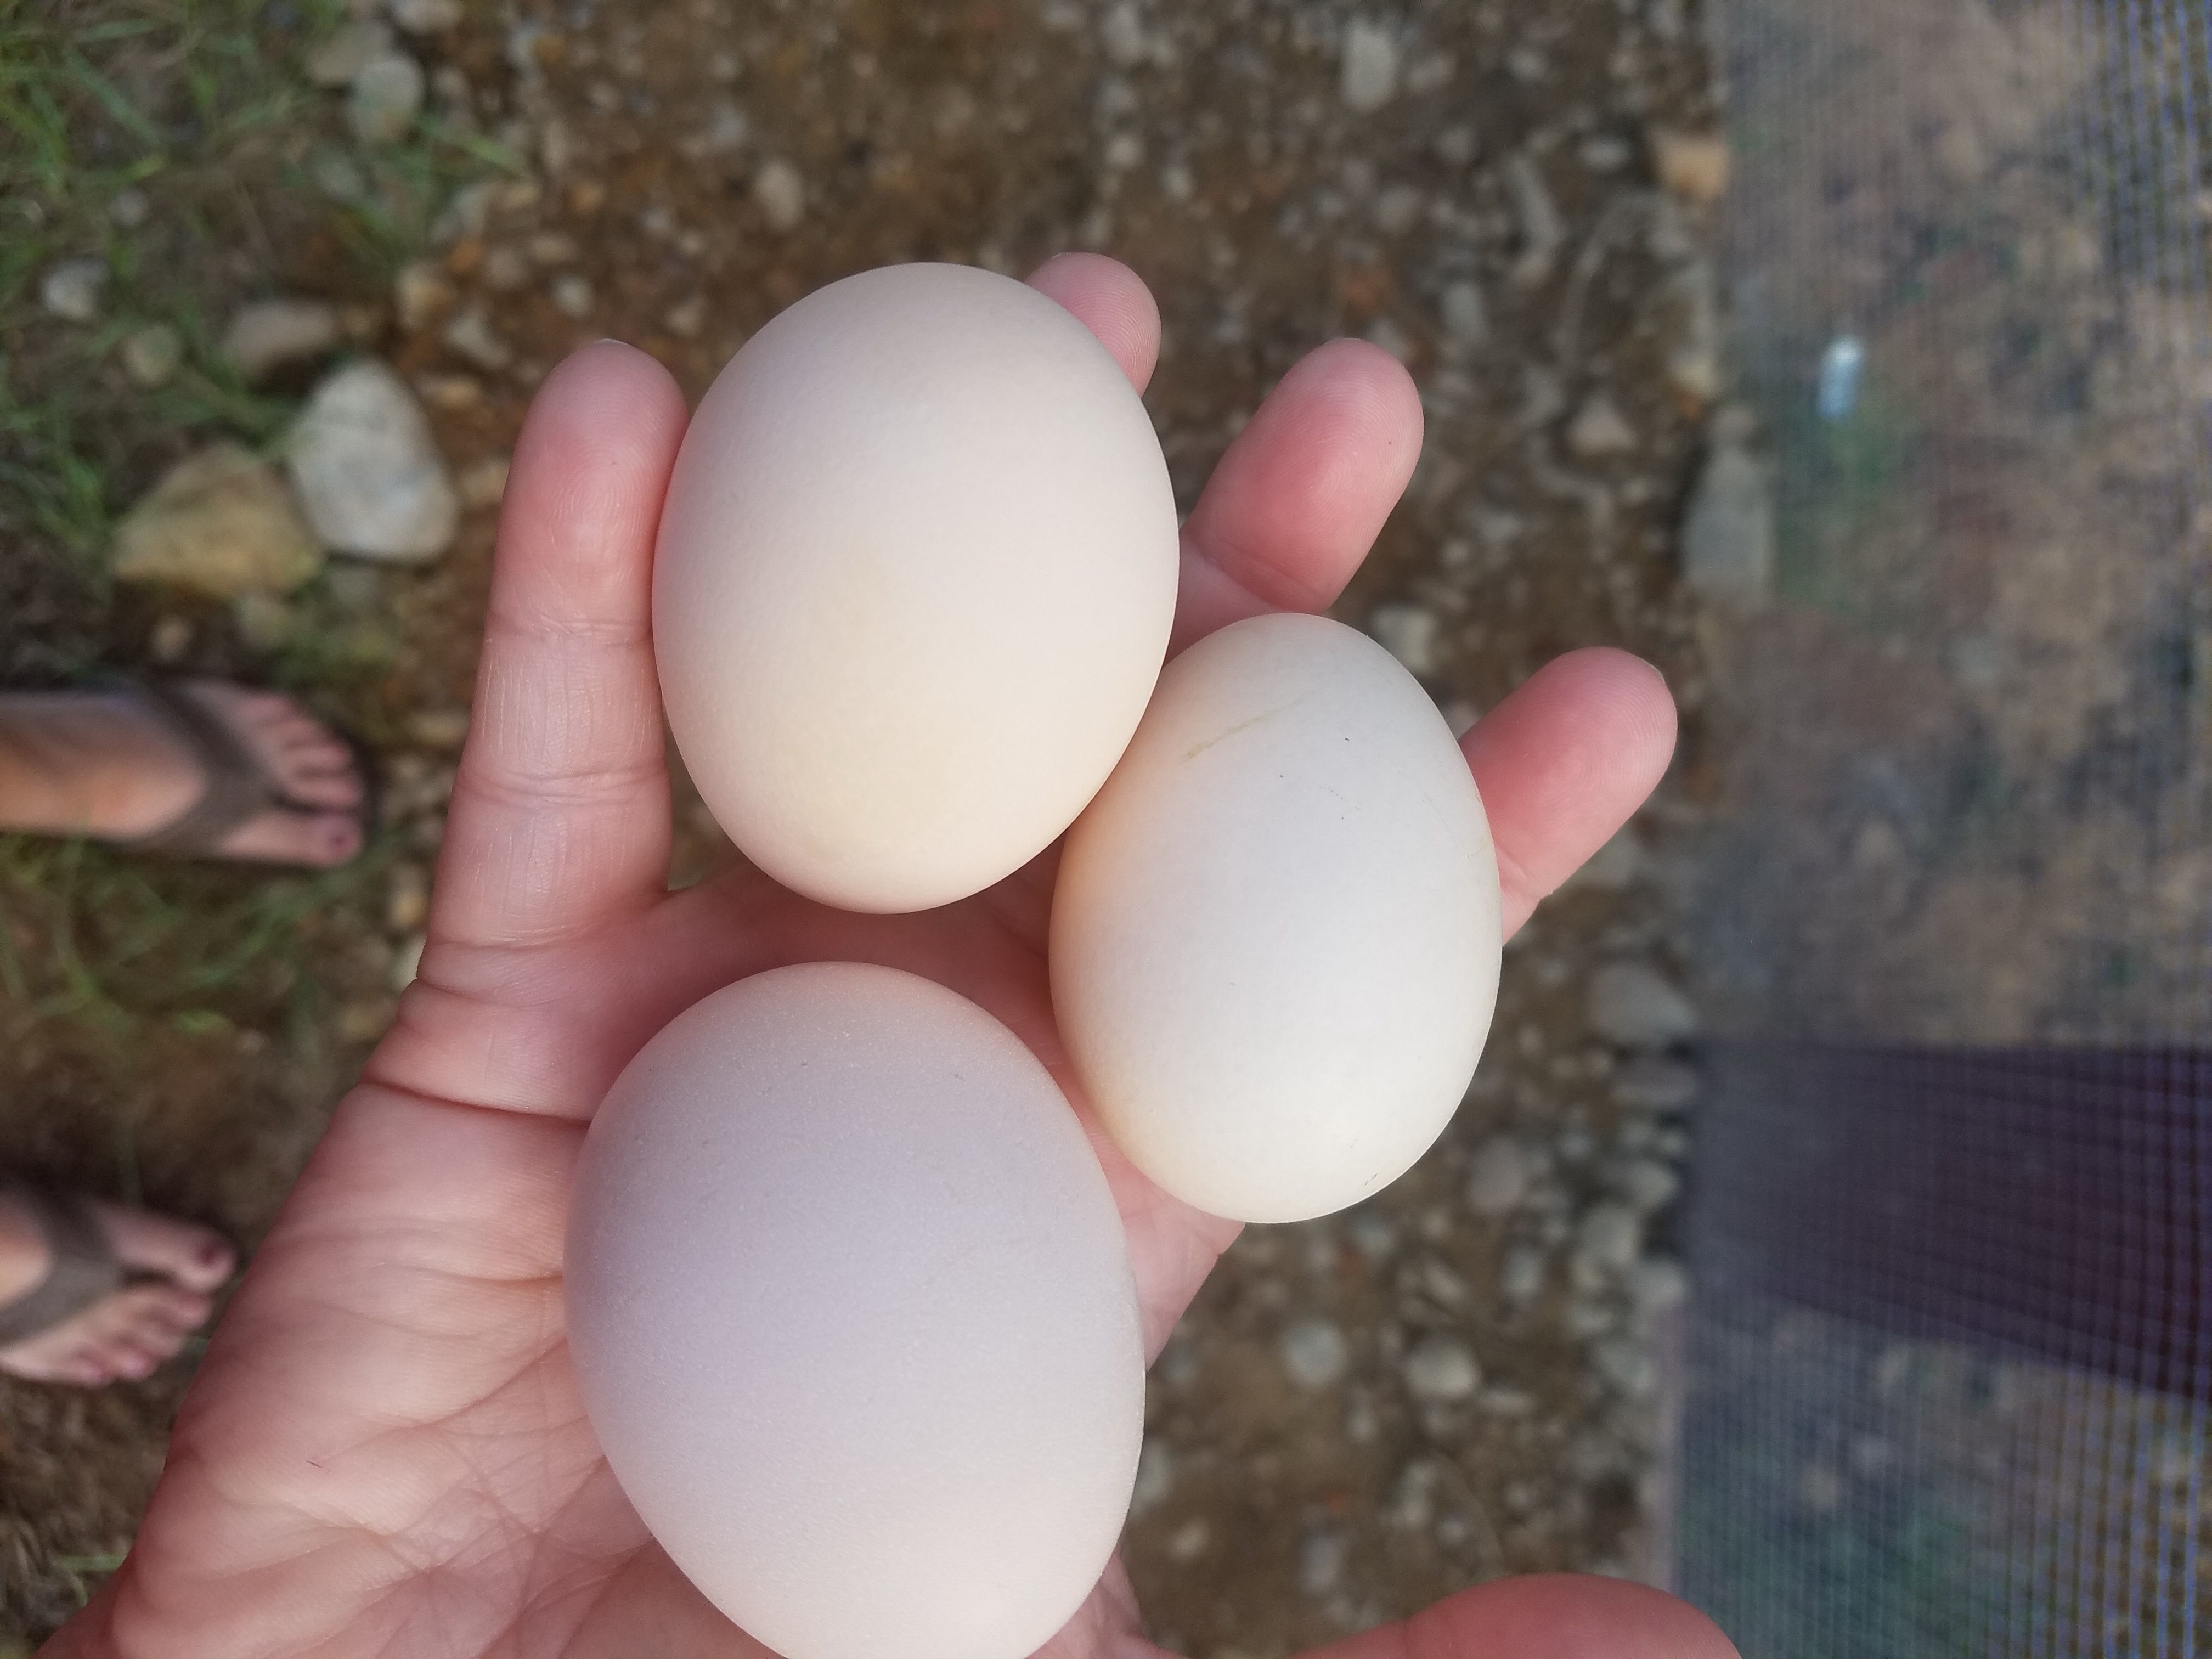 Our very first eggs!